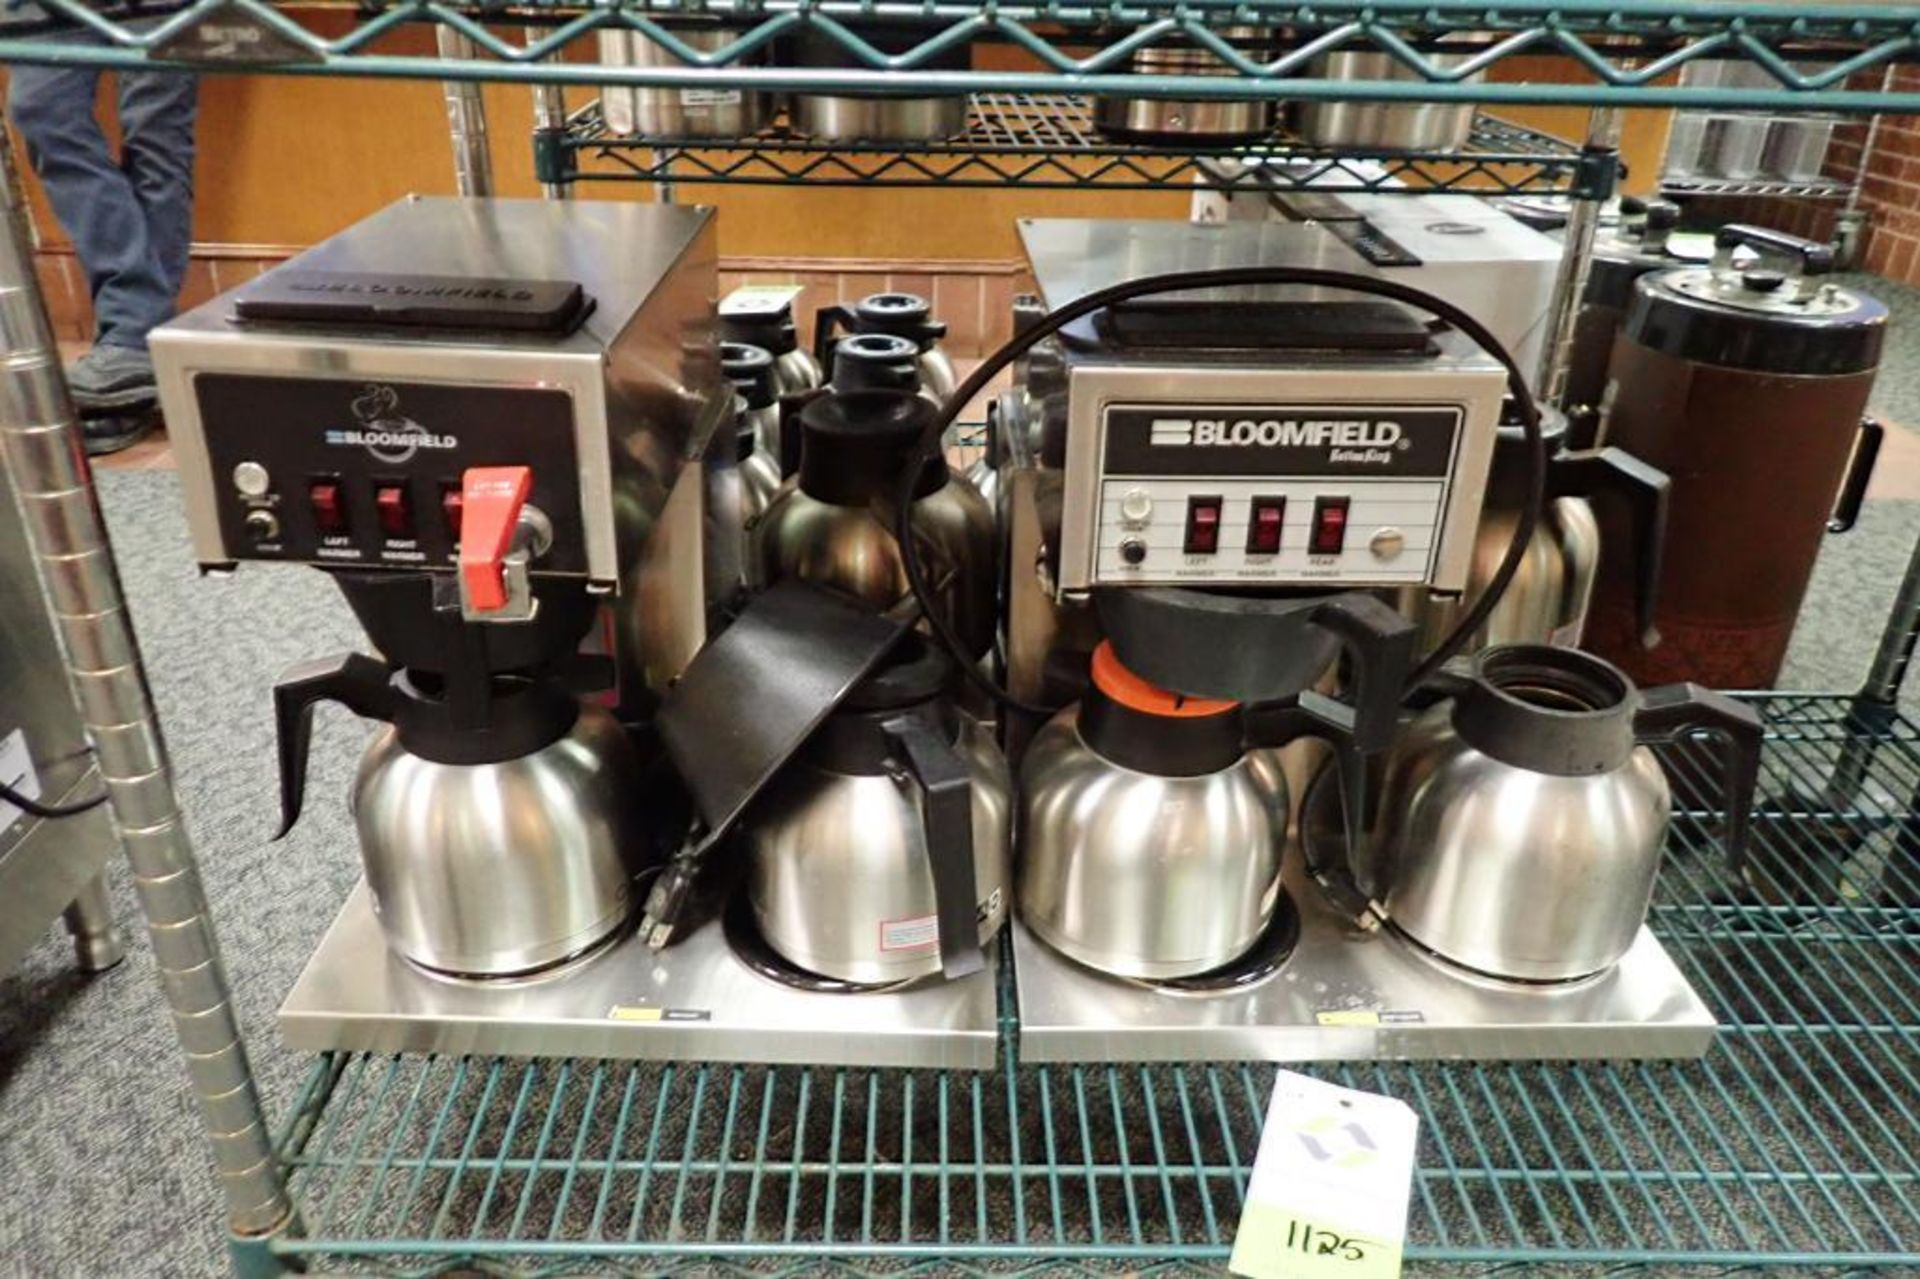 Bloomfield coffee maker with 2 coffee pots